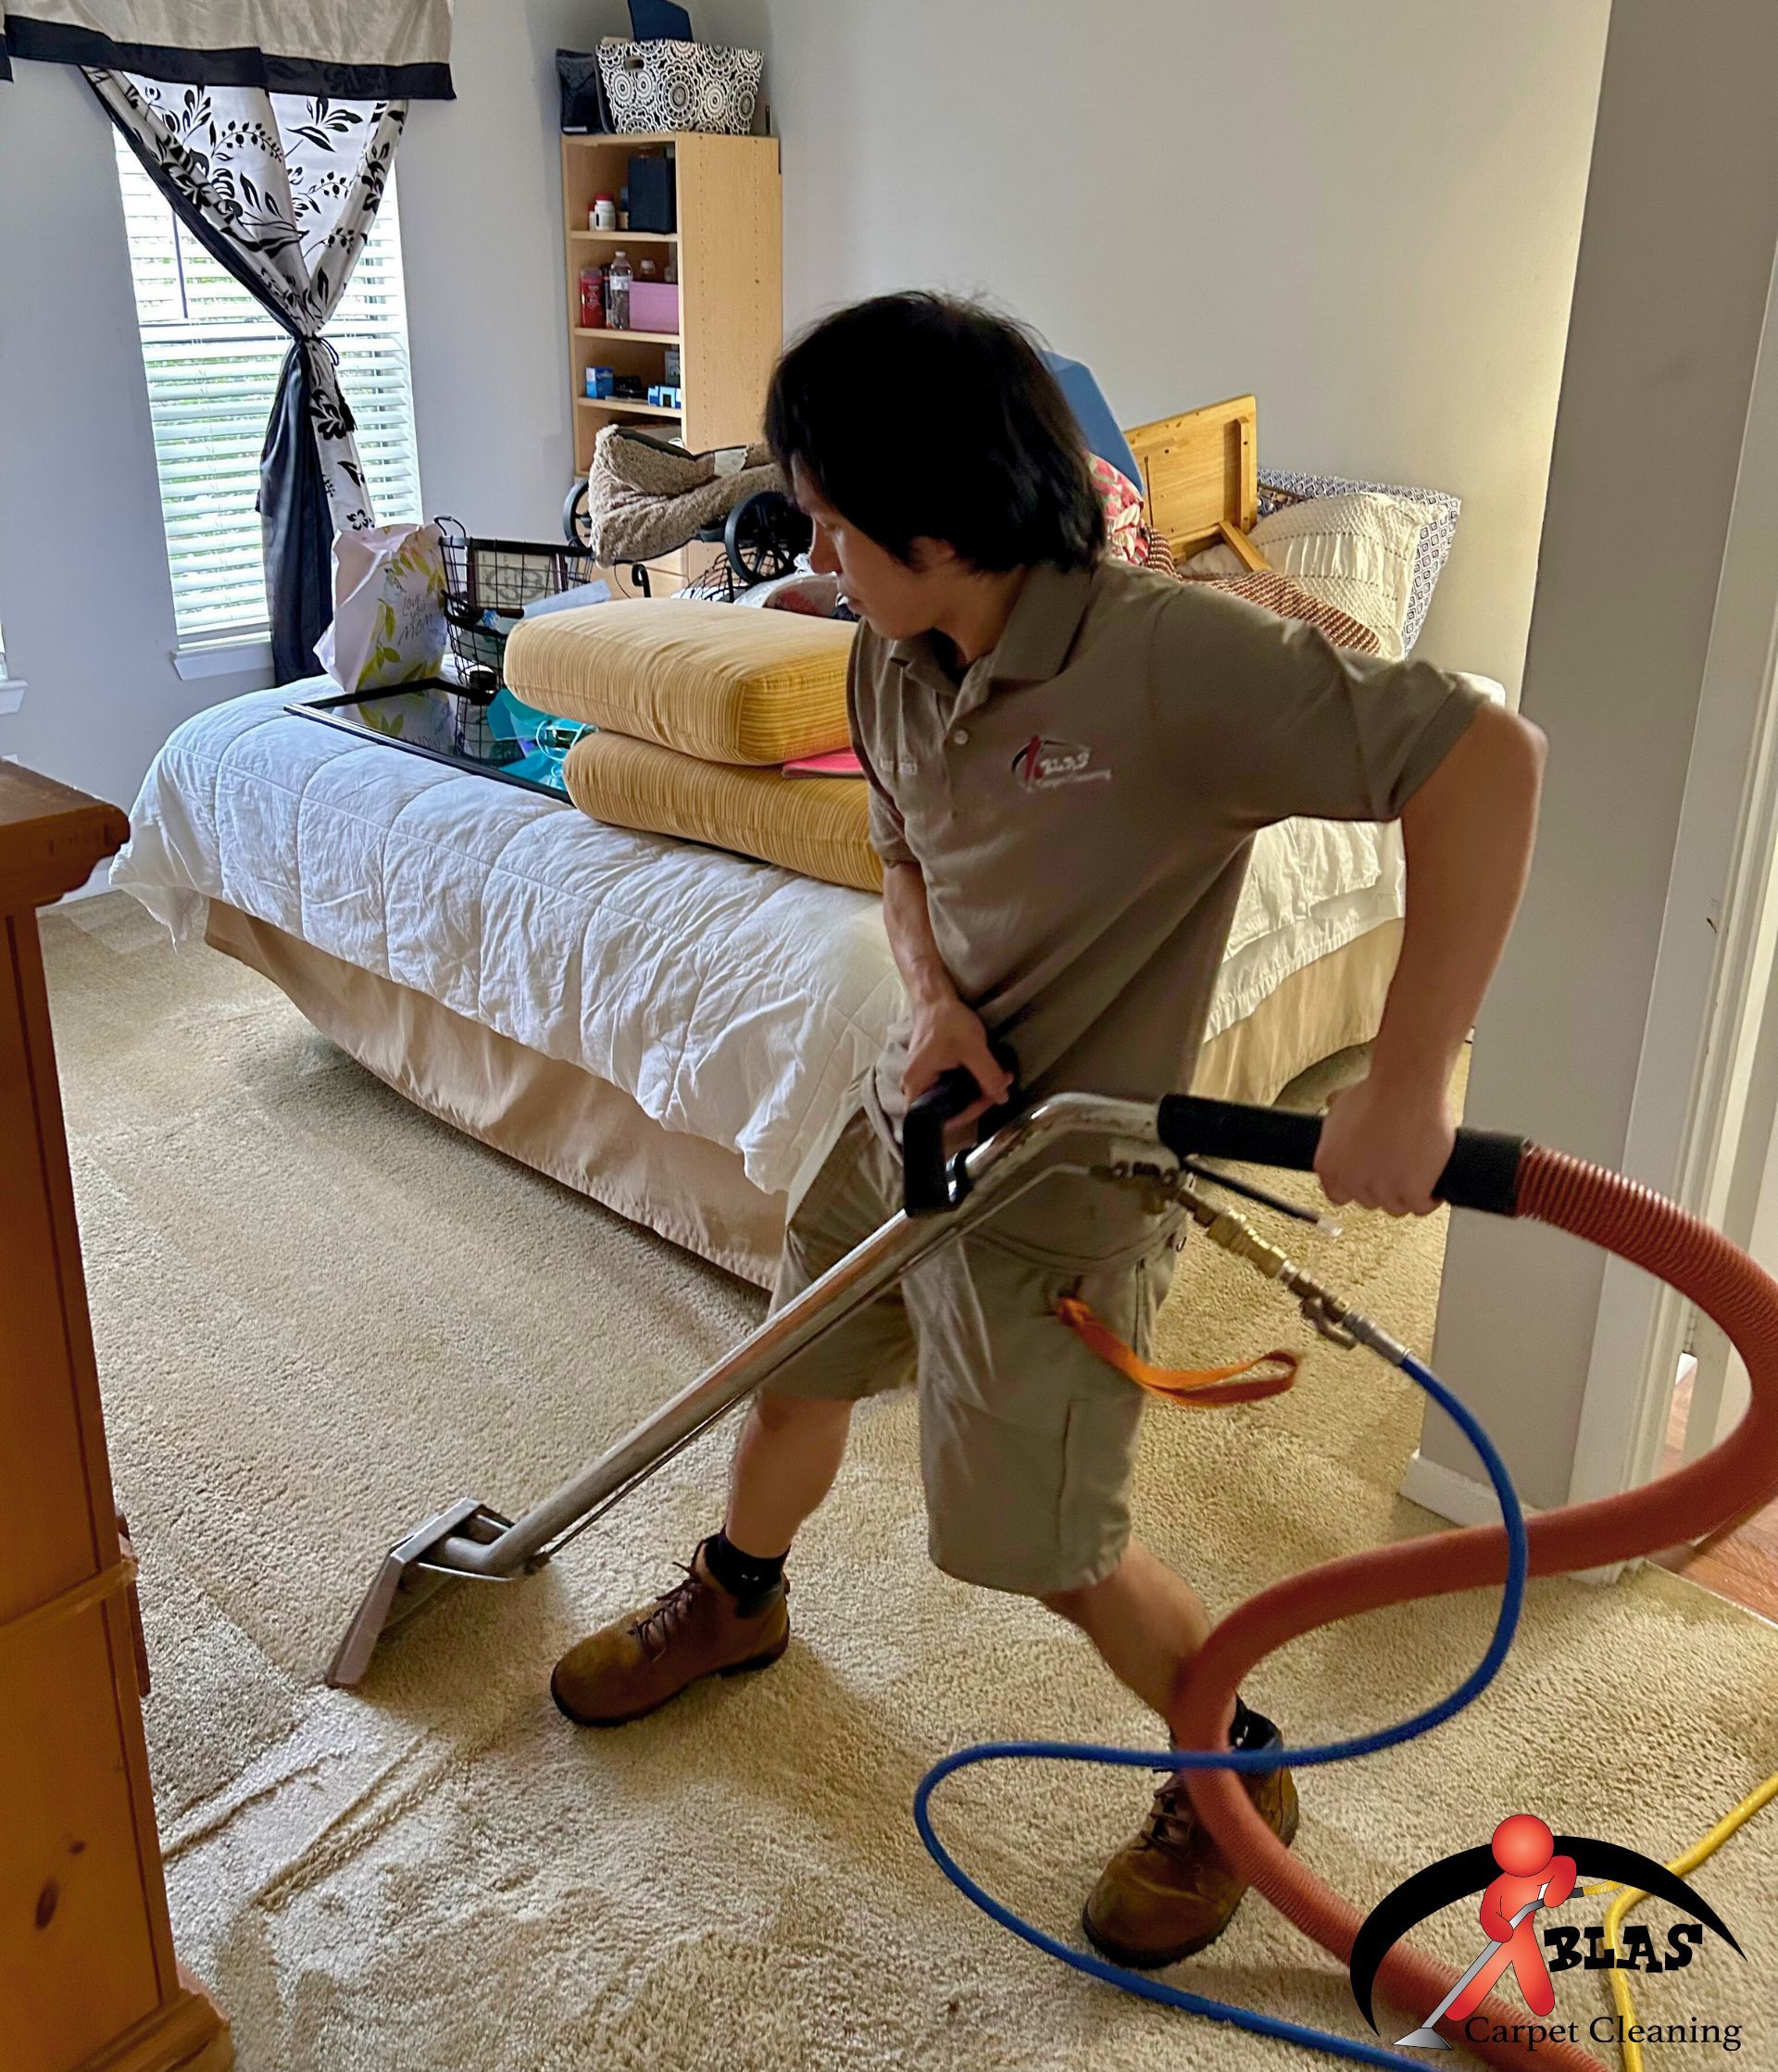 Professional steam carpet cleaning technician removing stains from residential carpeting in Atlanta, Georgia.